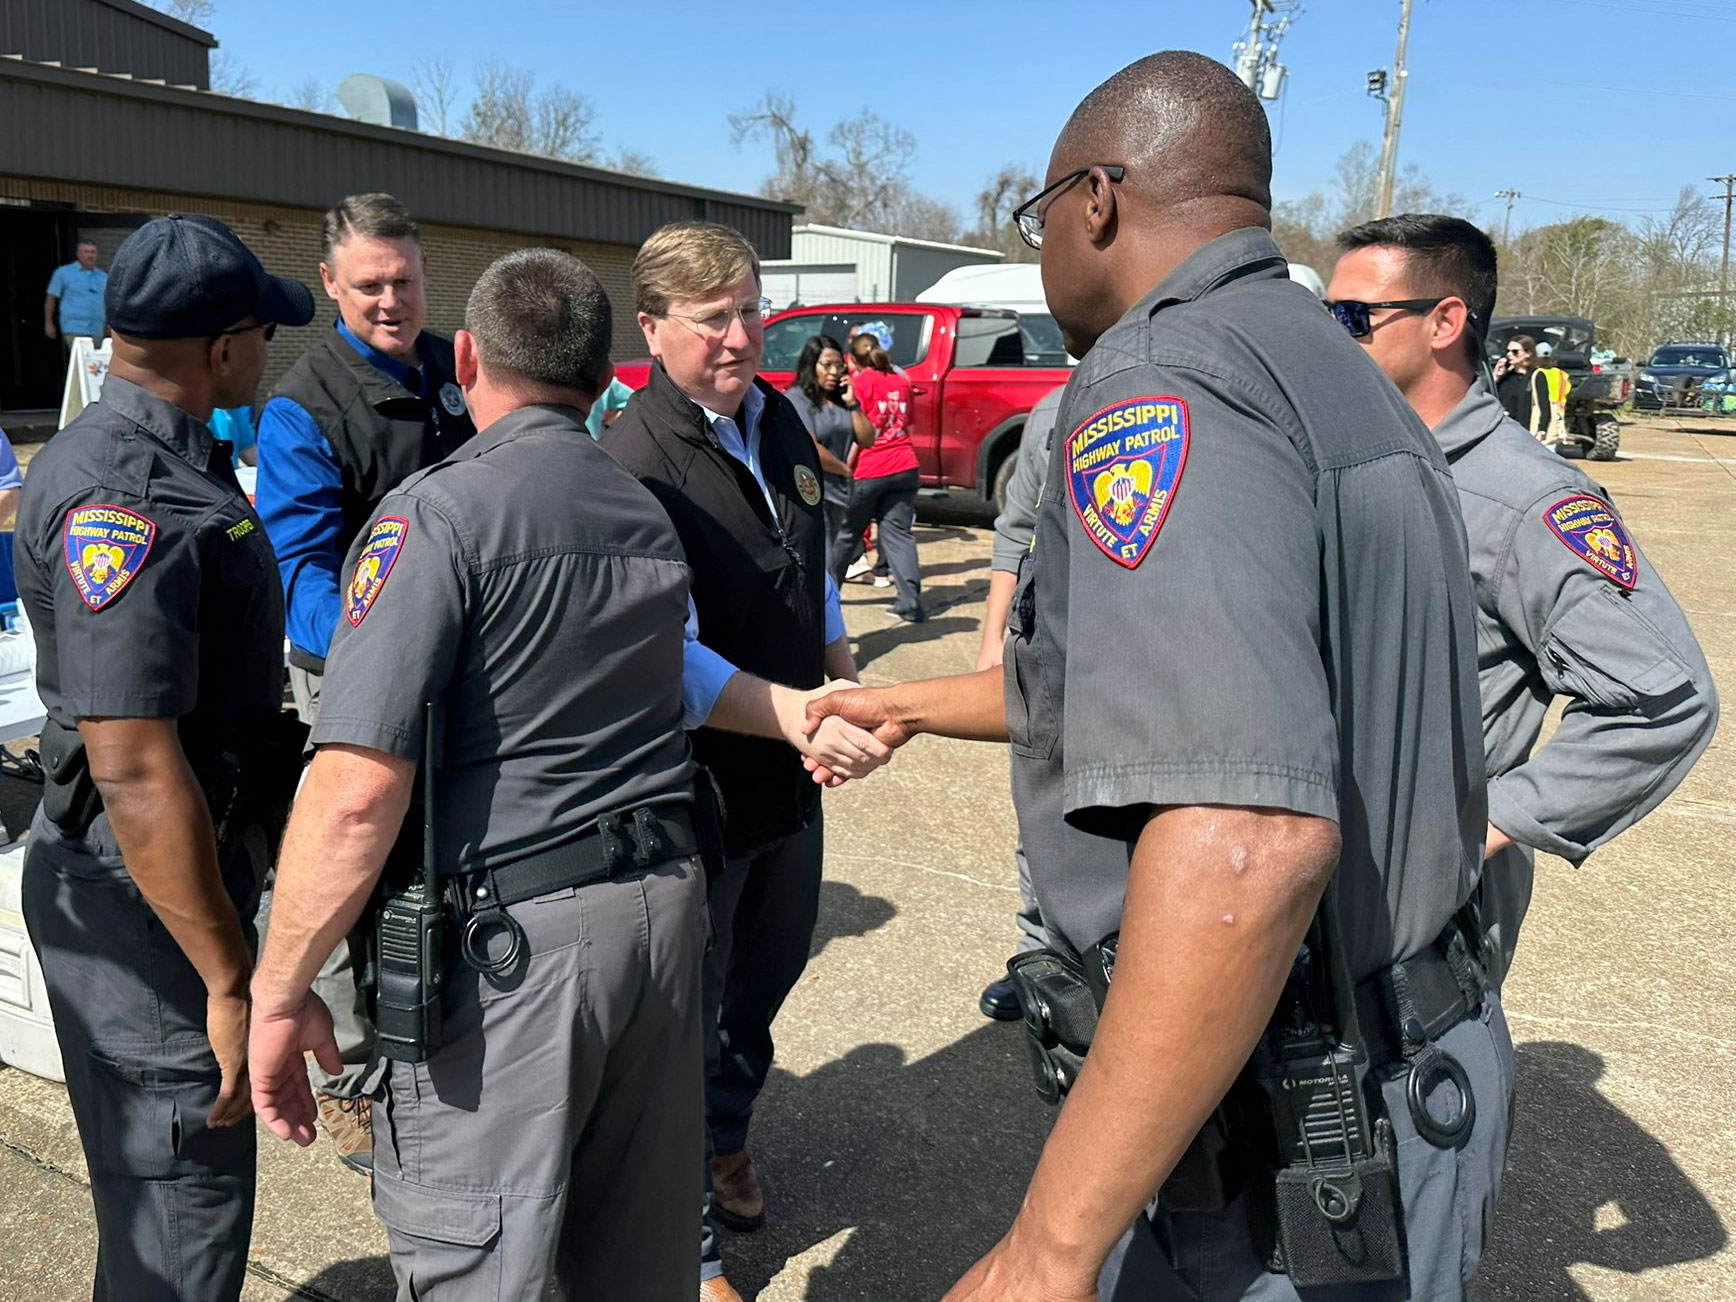 Mississippi Gov. Tate Reeves shakes hands with a highway patrol officer as he visits volunteers helping in the aftermath of a tornado in Rolling Fork, Mississippi, on March 25.